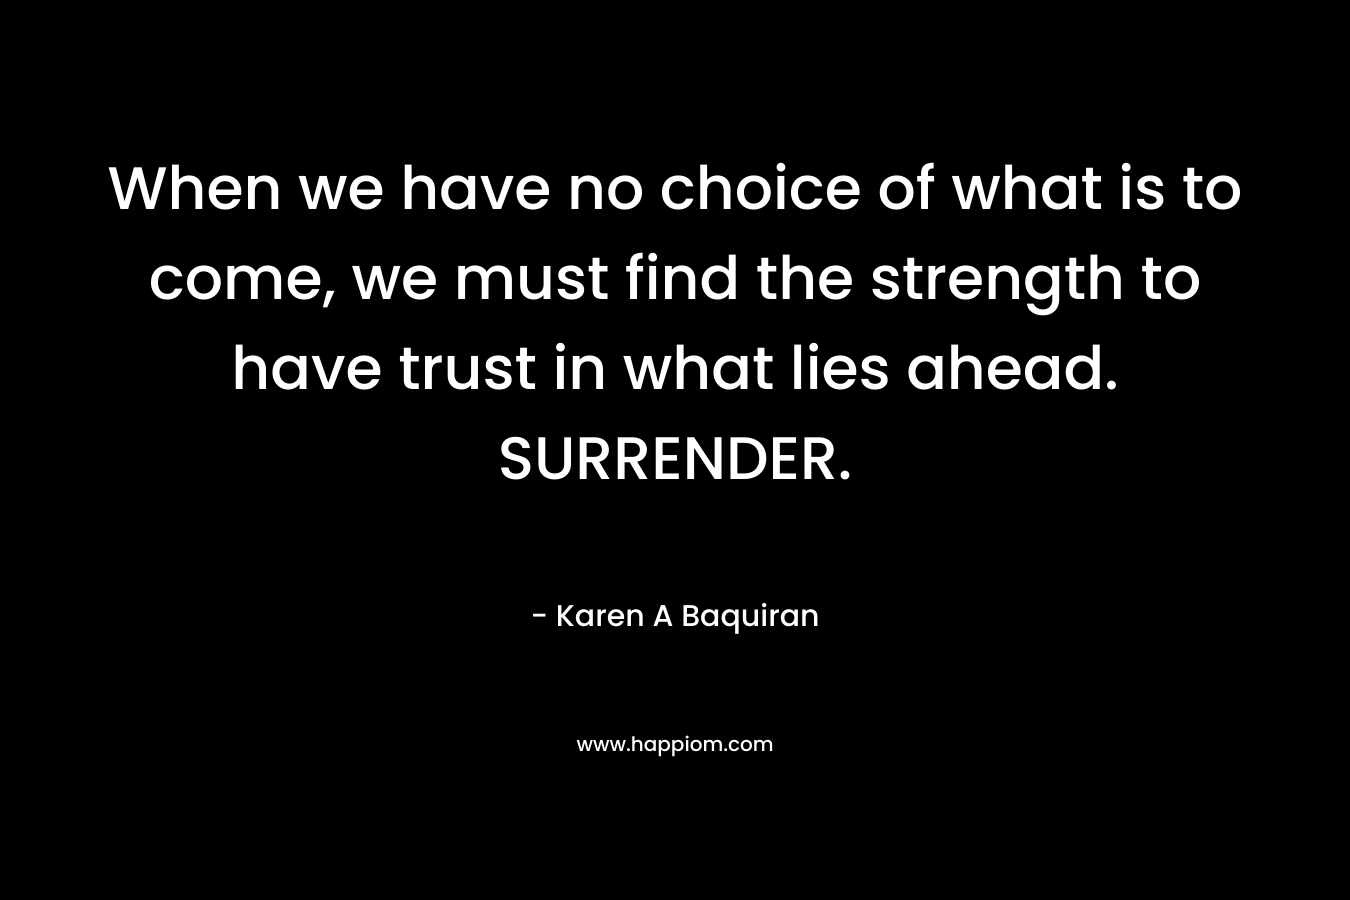 When we have no choice of what is to come, we must find the strength to have trust in what lies ahead. SURRENDER.